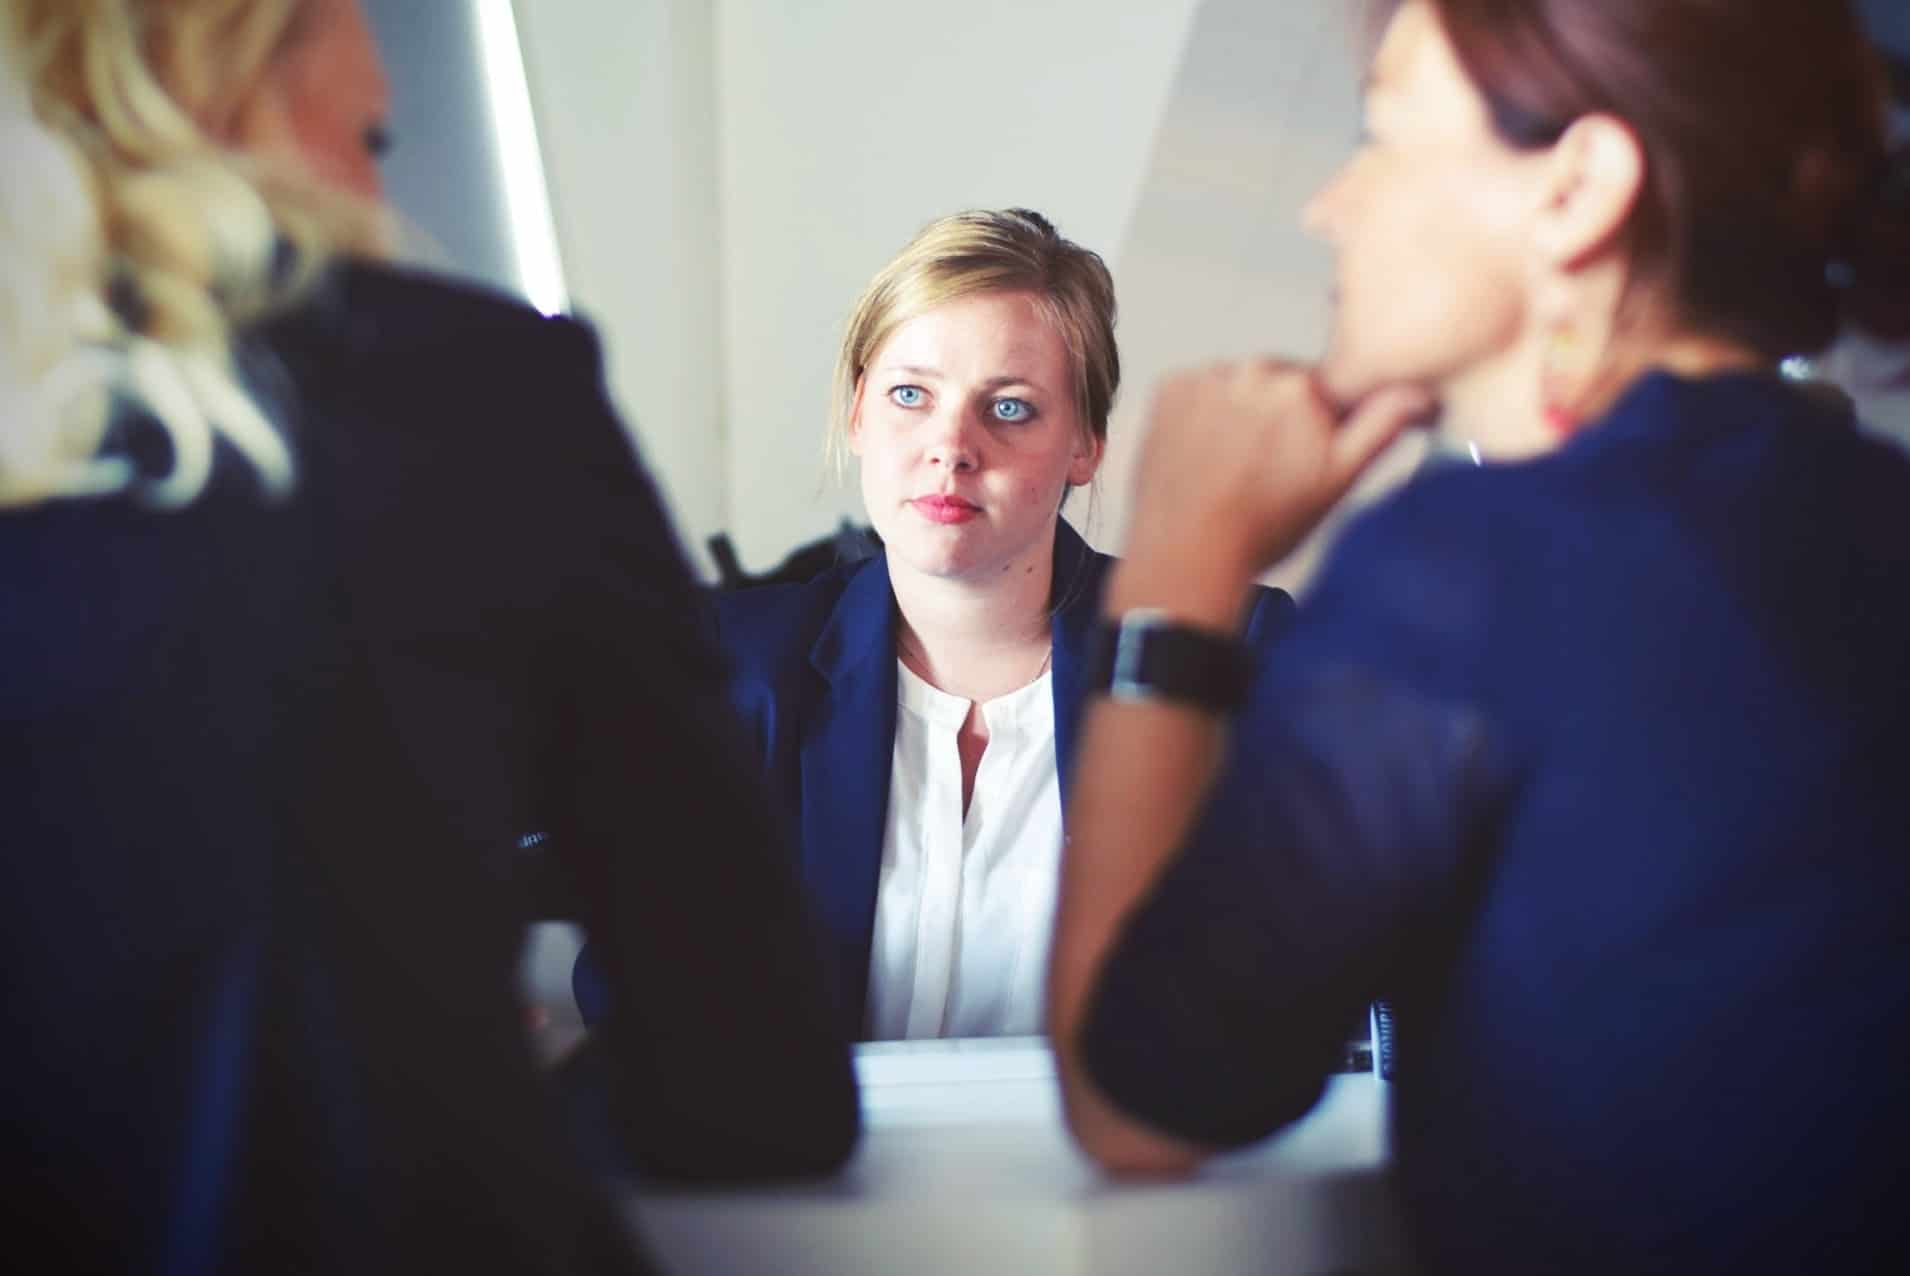 How to make People Fear for their Life in a Business Meeting